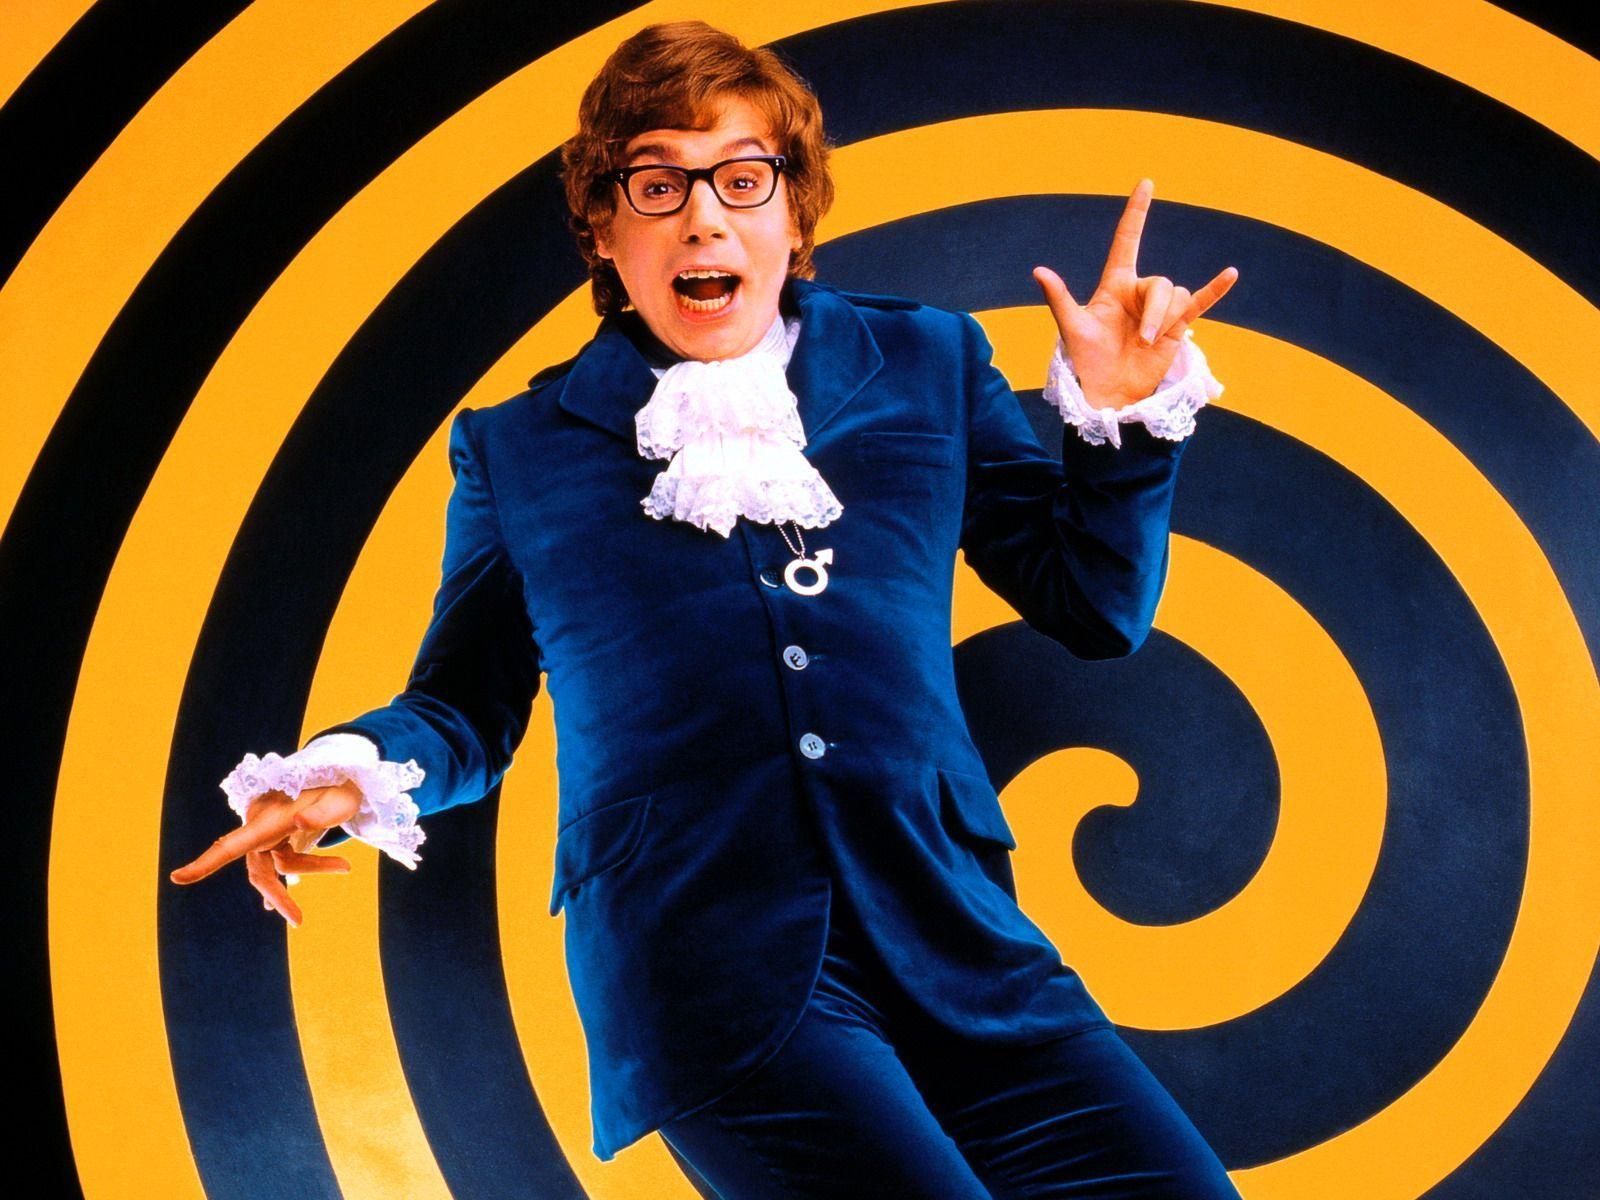 Picture, Austin Powers: The Spy Who Shagged Me, Austin Powers